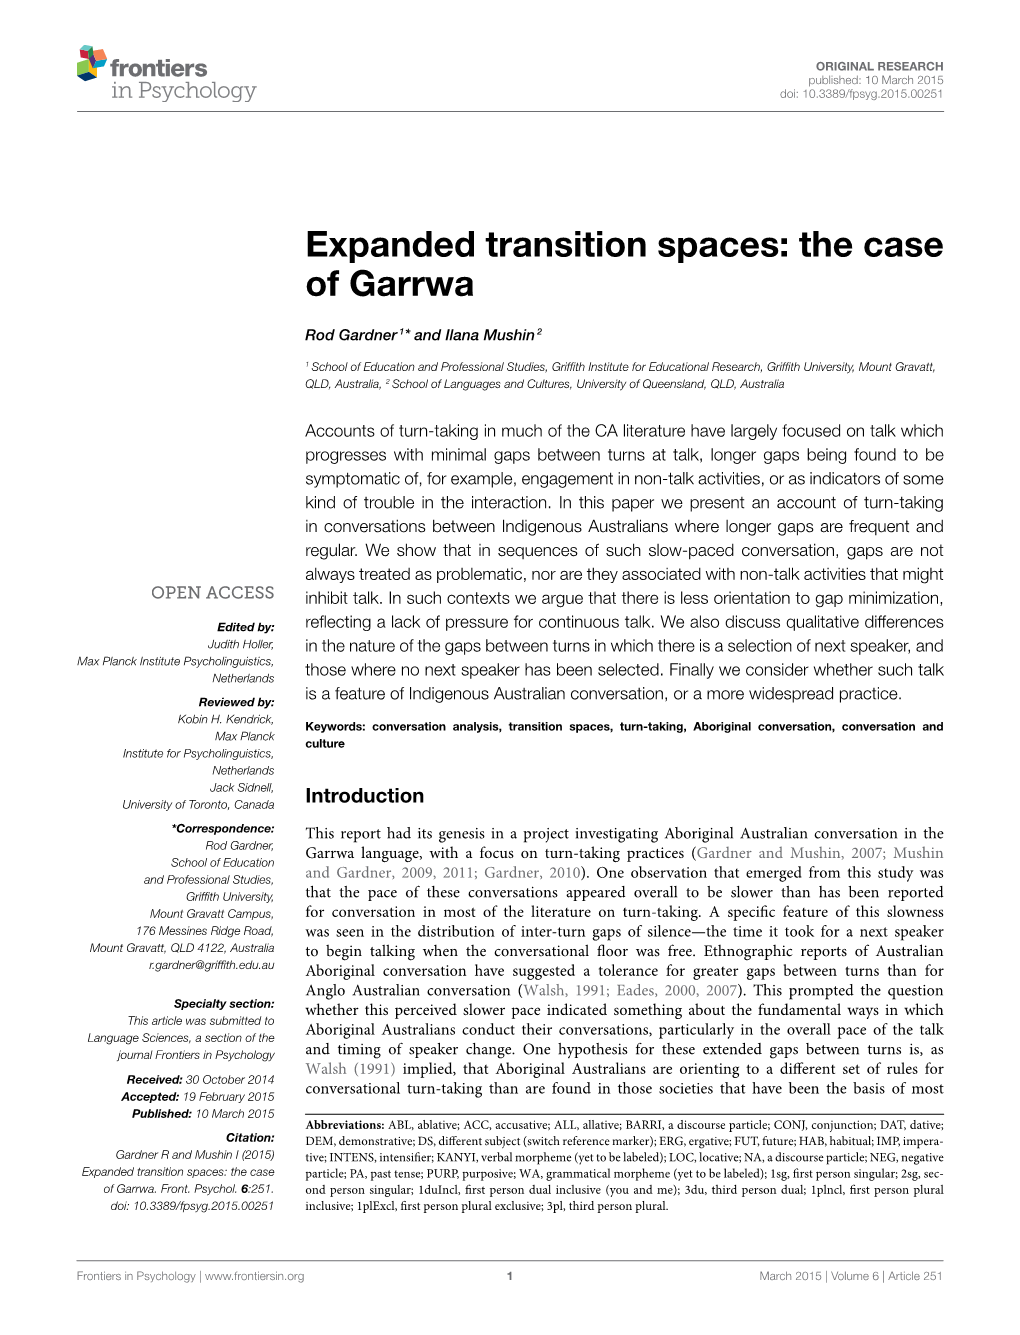 Expanded Transition Spaces: the Case of Garrwa